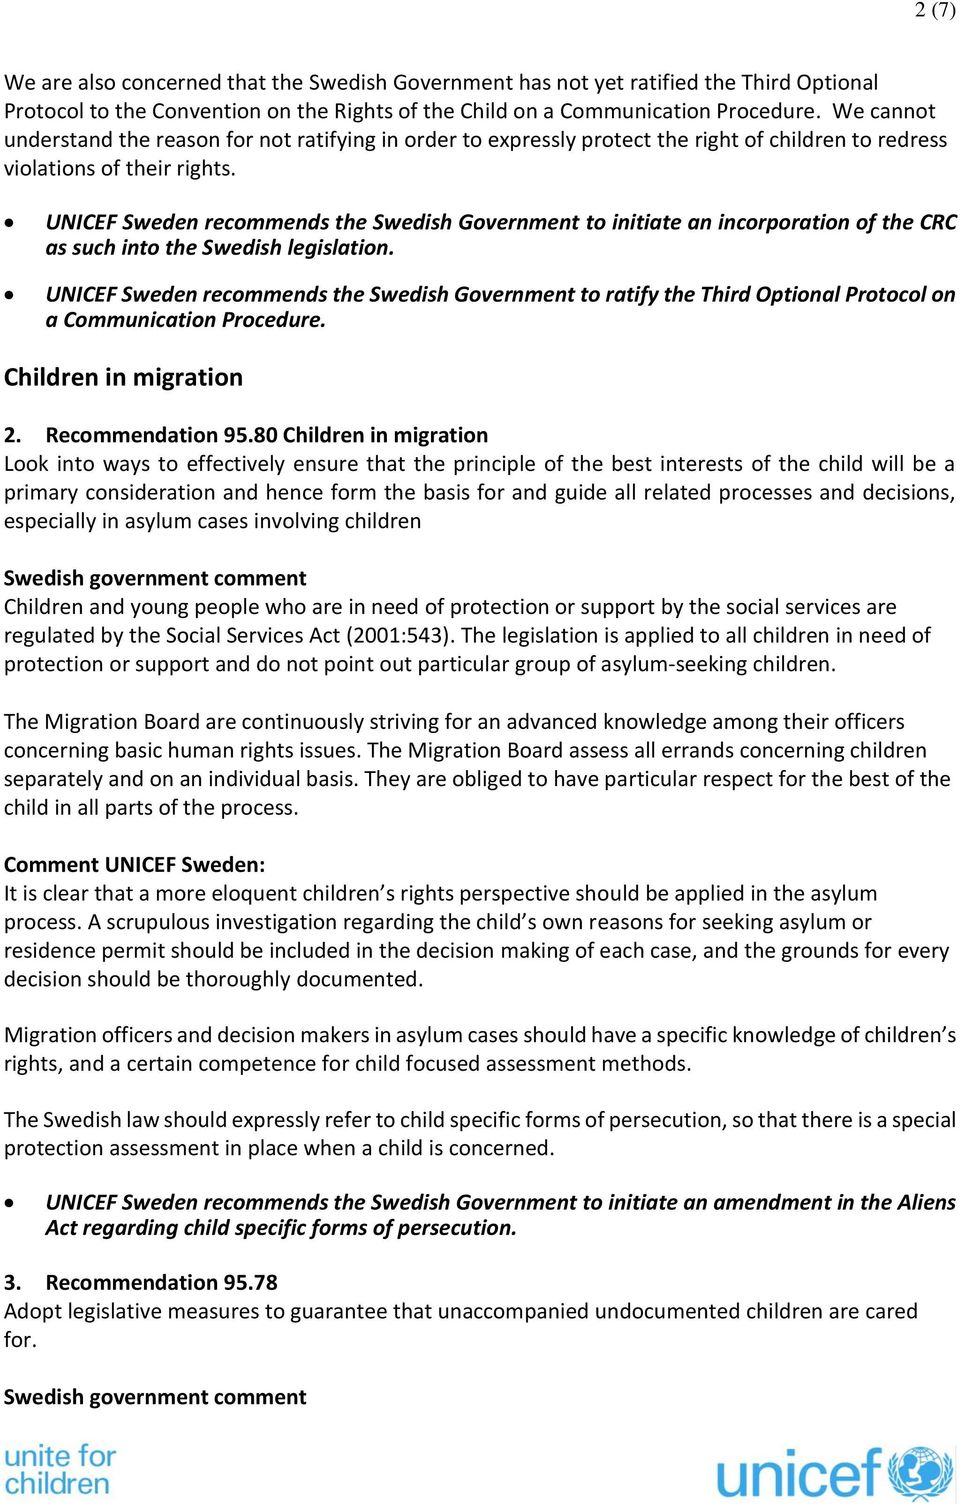 UNICEF Sweden recommends the Swedish Government to initiate an incorporation of the CRC as such into the Swedish legislation.